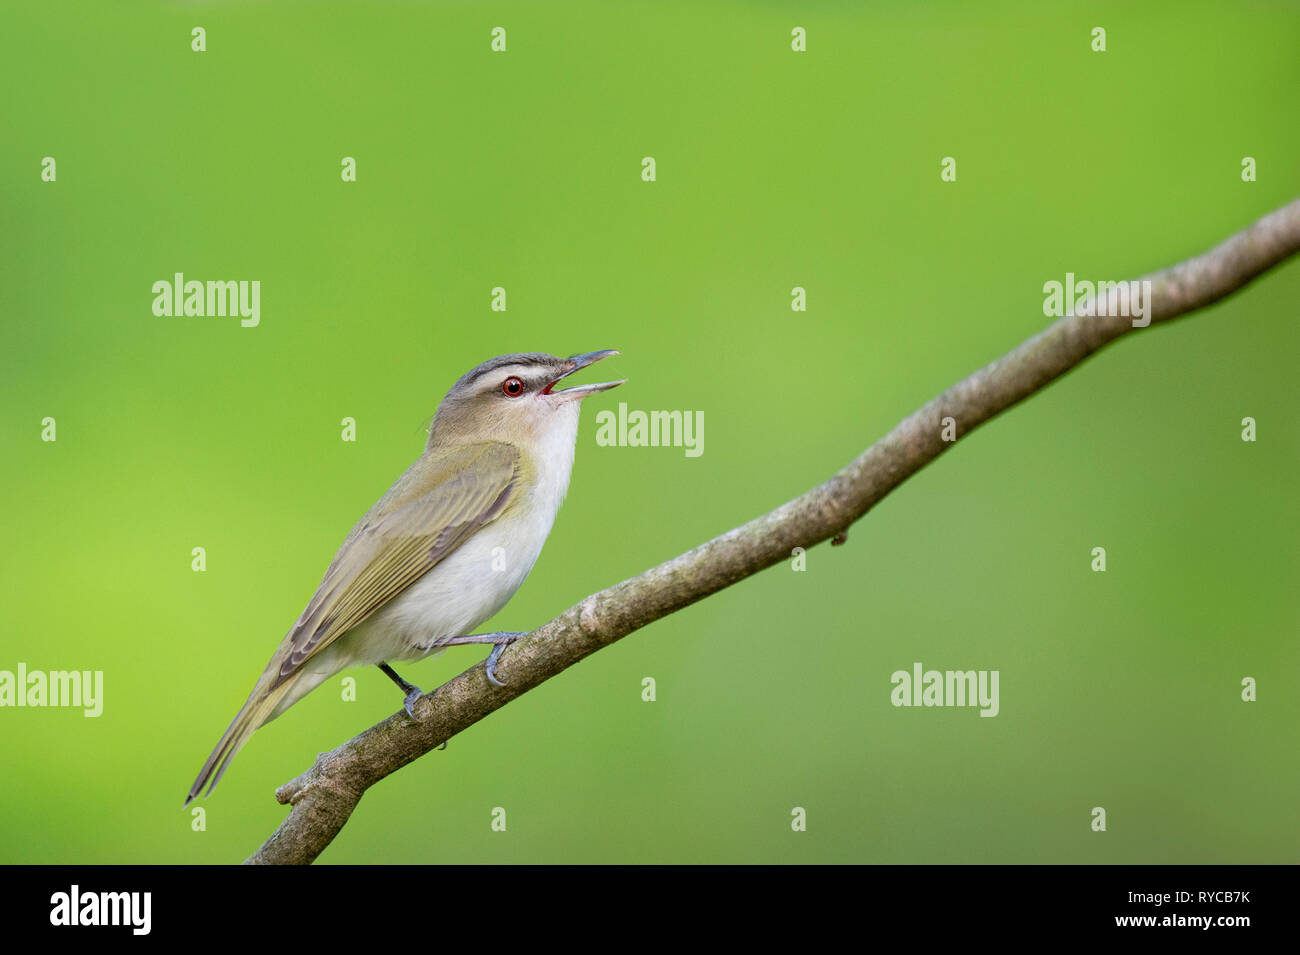 A portrait of a Red-eyed Vireo singing while perched on a branch with a smooth bright green background. Stock Photo